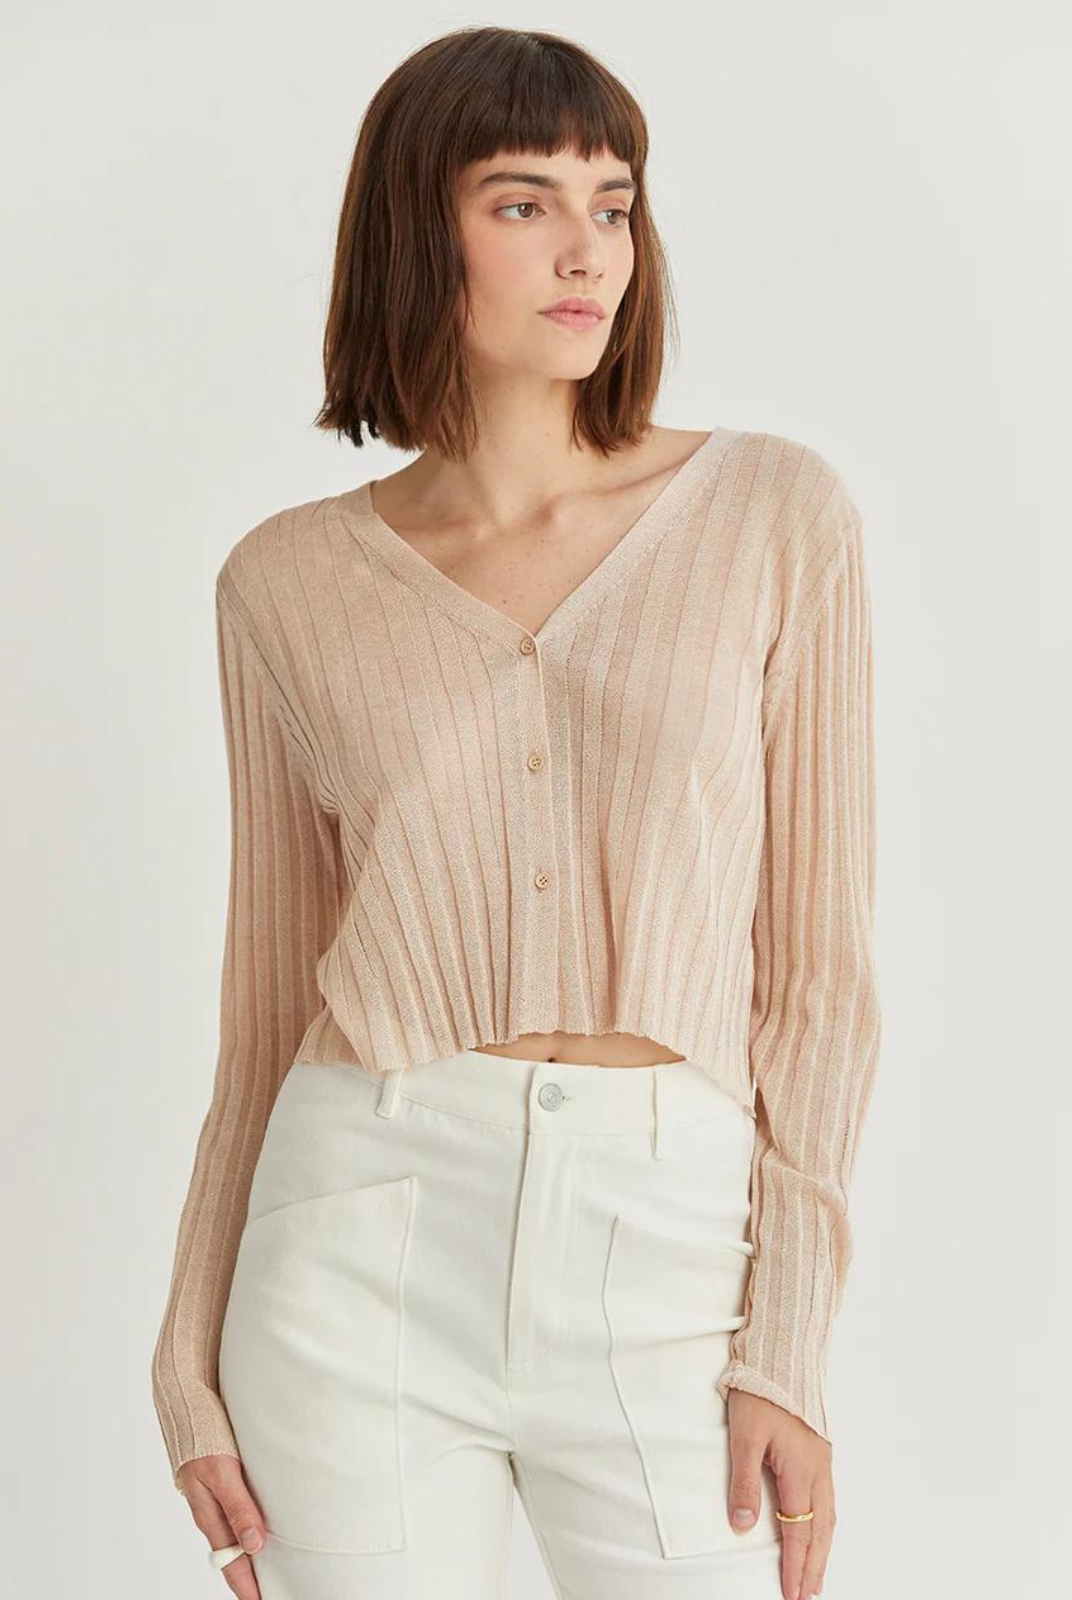 Leah Sheer Rib Cardigan. The Leah Sheer Rib Cardigan is a lightweight ribbed-knit cardigan featuring a V-neckline and long sleeves in a semi cropped length.